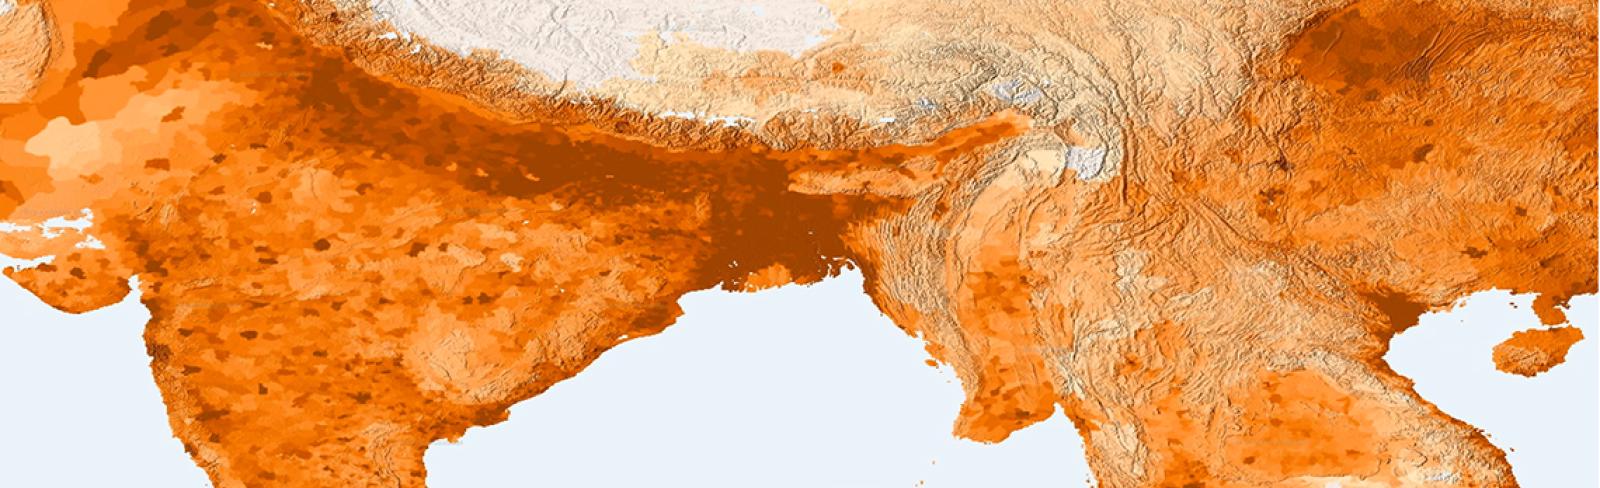 ESMAP Releases New Tool that Maps Solar Potential Globally	